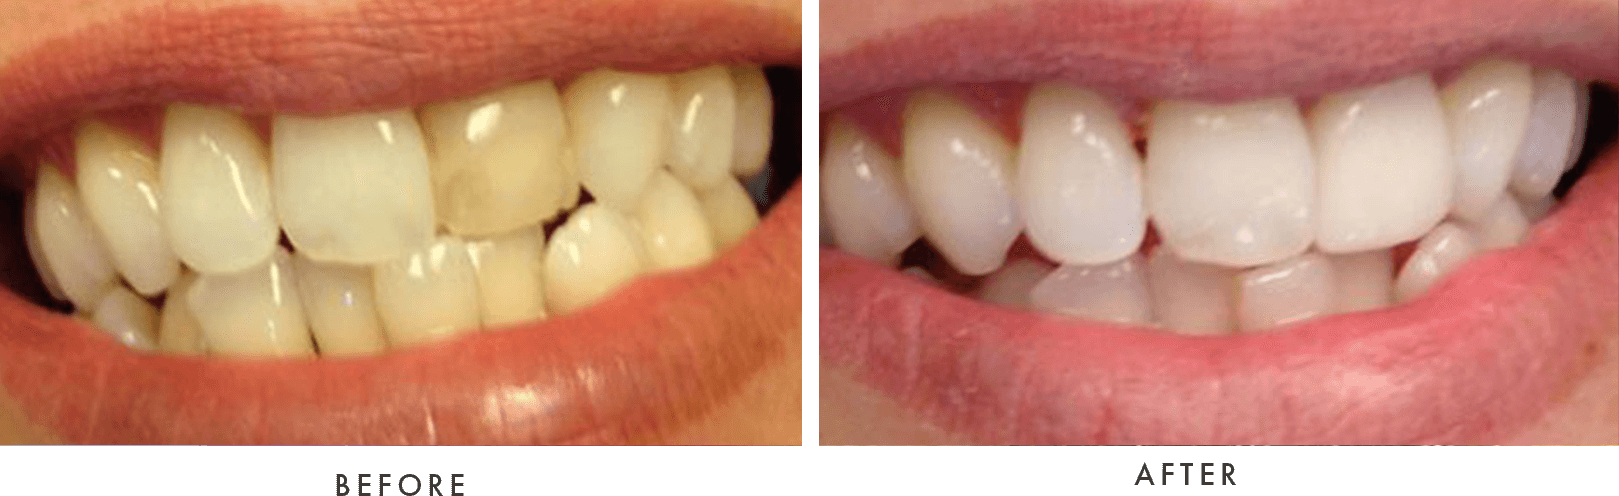 Before and after procedure photos